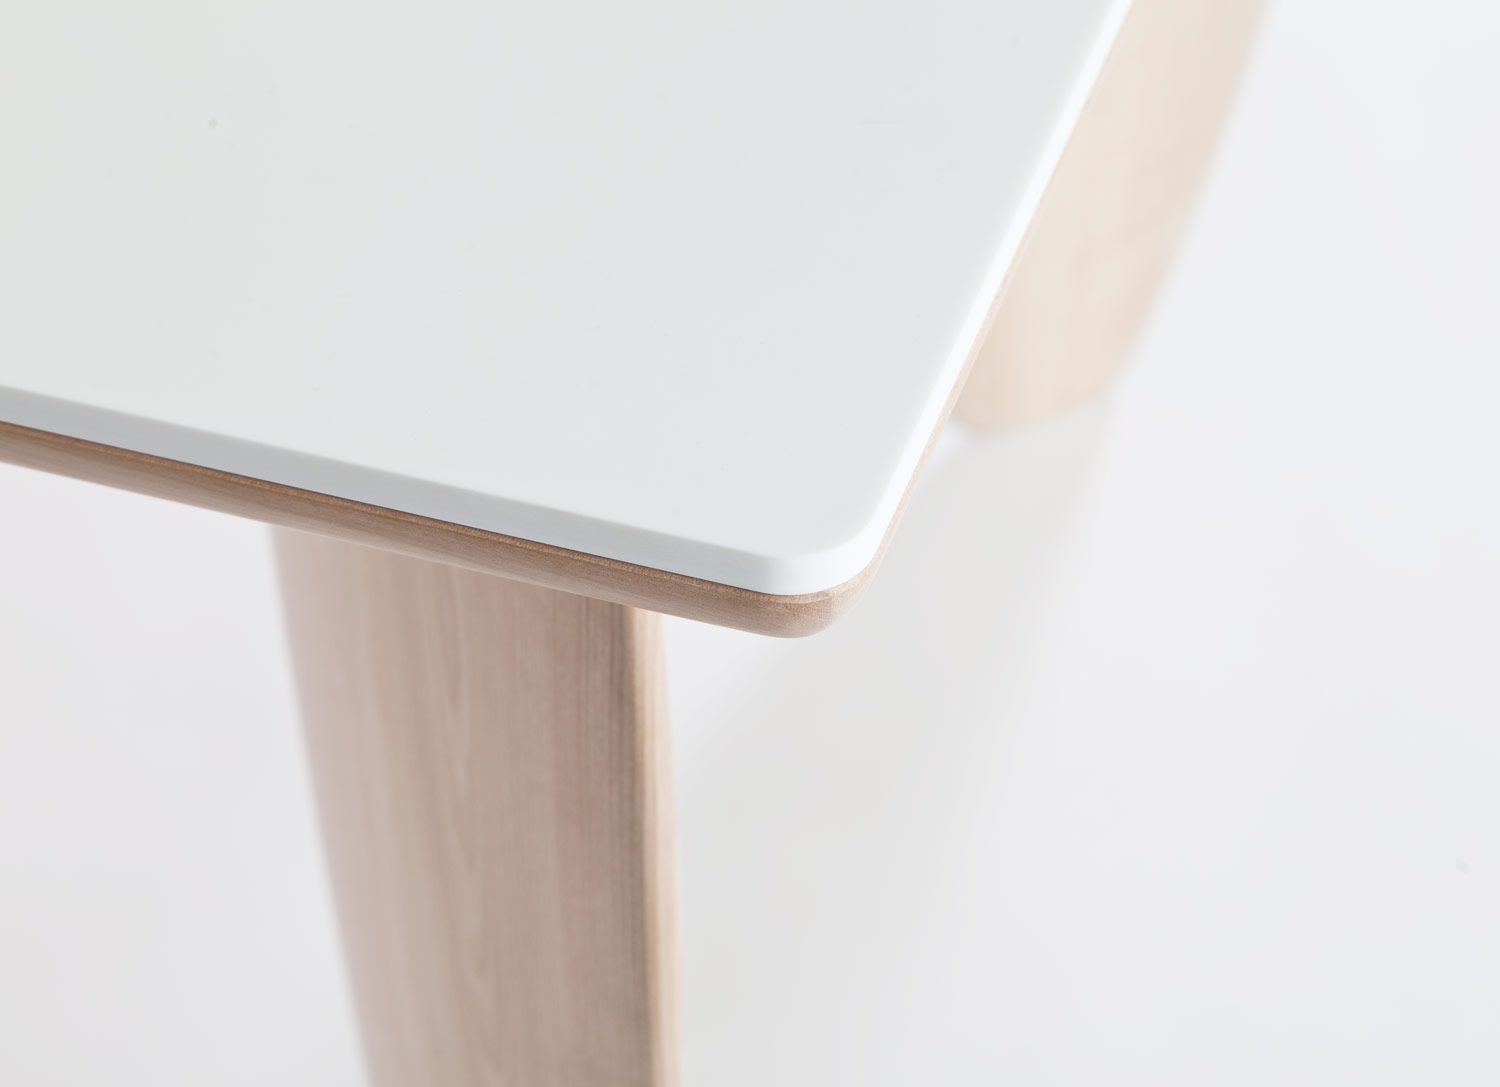 Surfboard table by Early Work | Flodeau.com